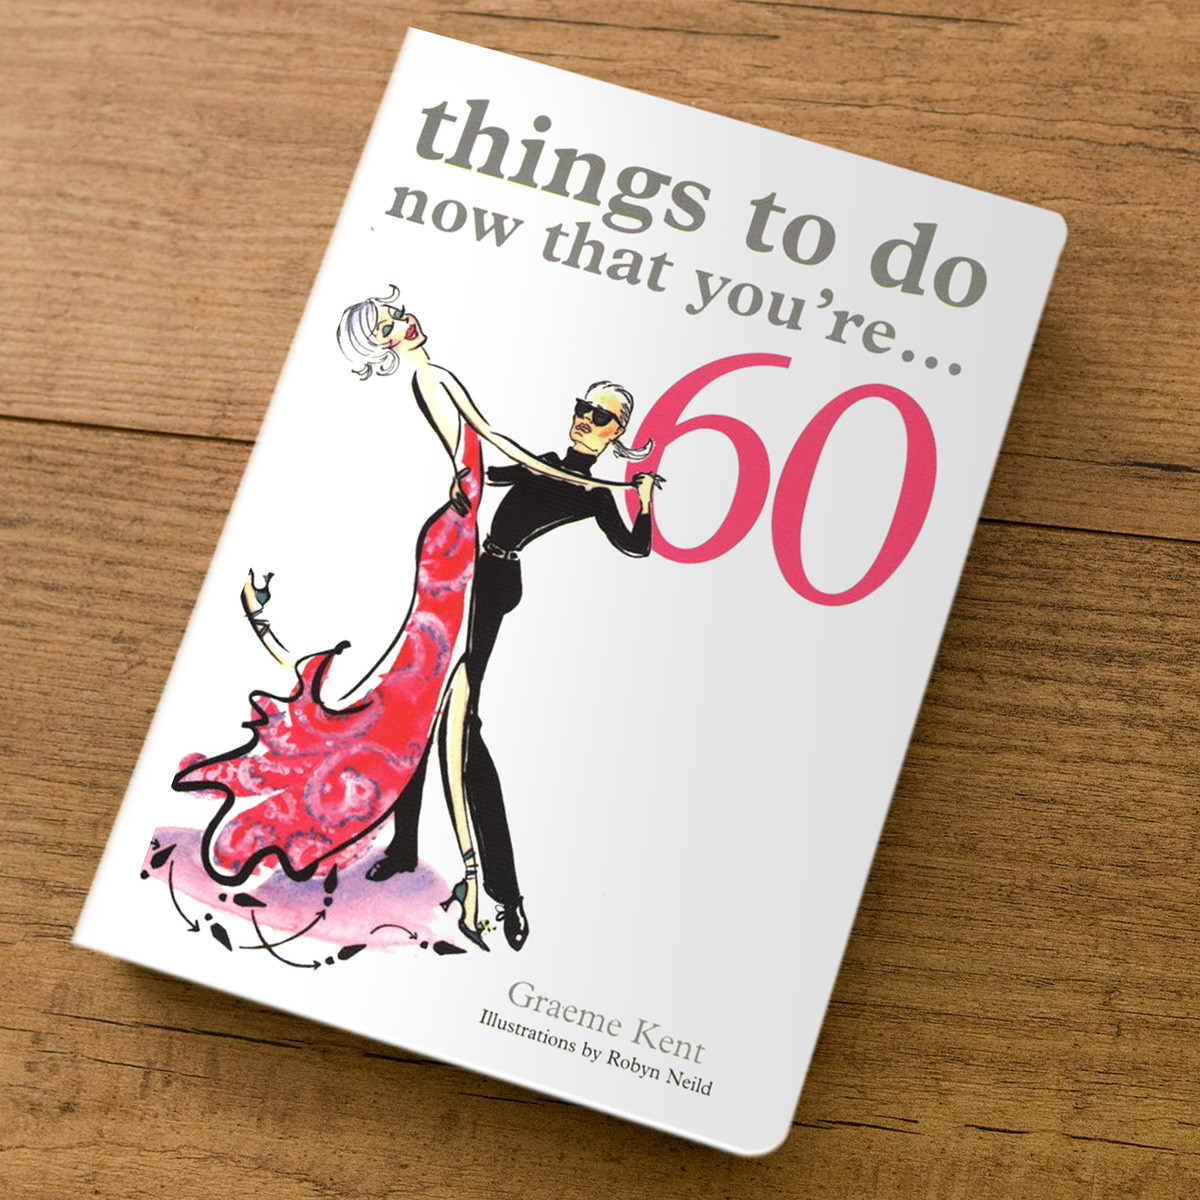 Ideas For A 60Th Birthday Gift
 Things To Do Now That You re 60 Gift Book 60th